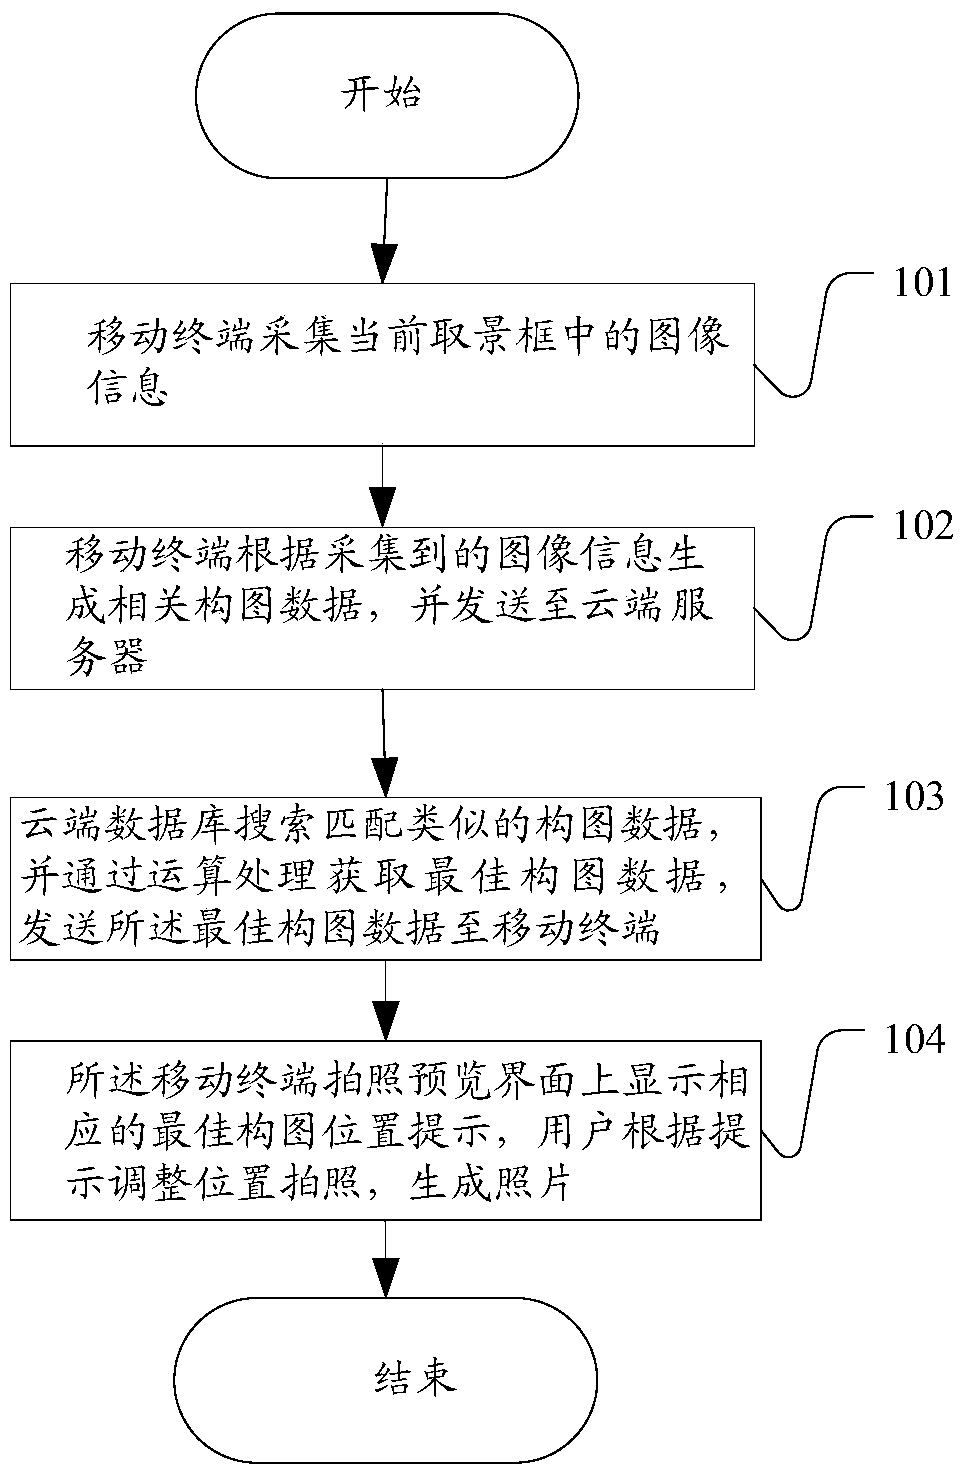 Mobile terminal-based photo preview composition guidance method and system